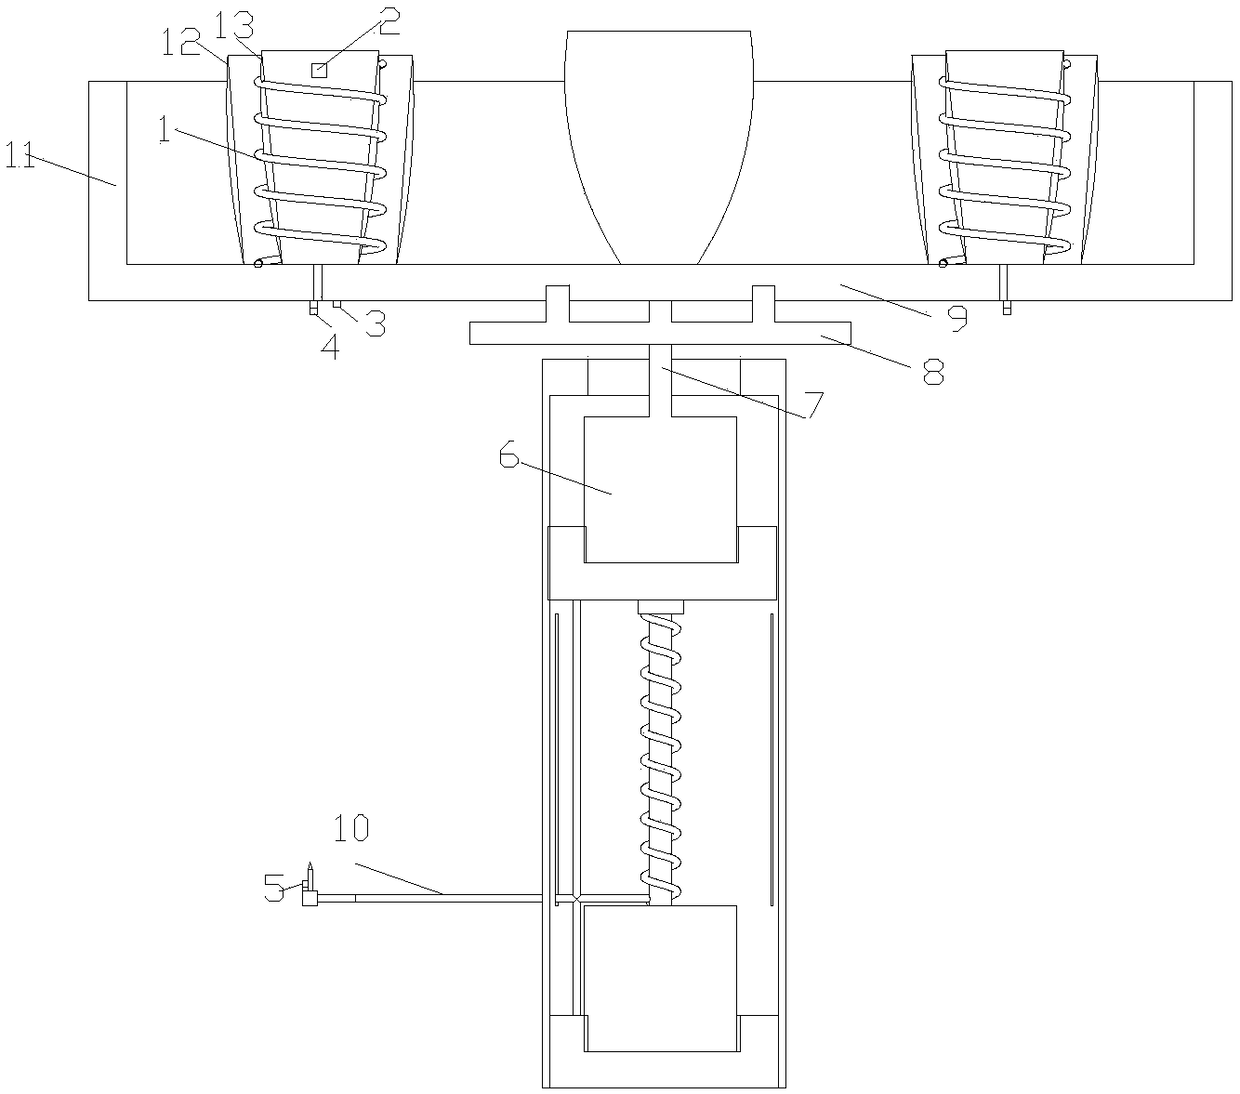 Infusion bottle automatic rotation and needle pulling method for multiple infusion drugs